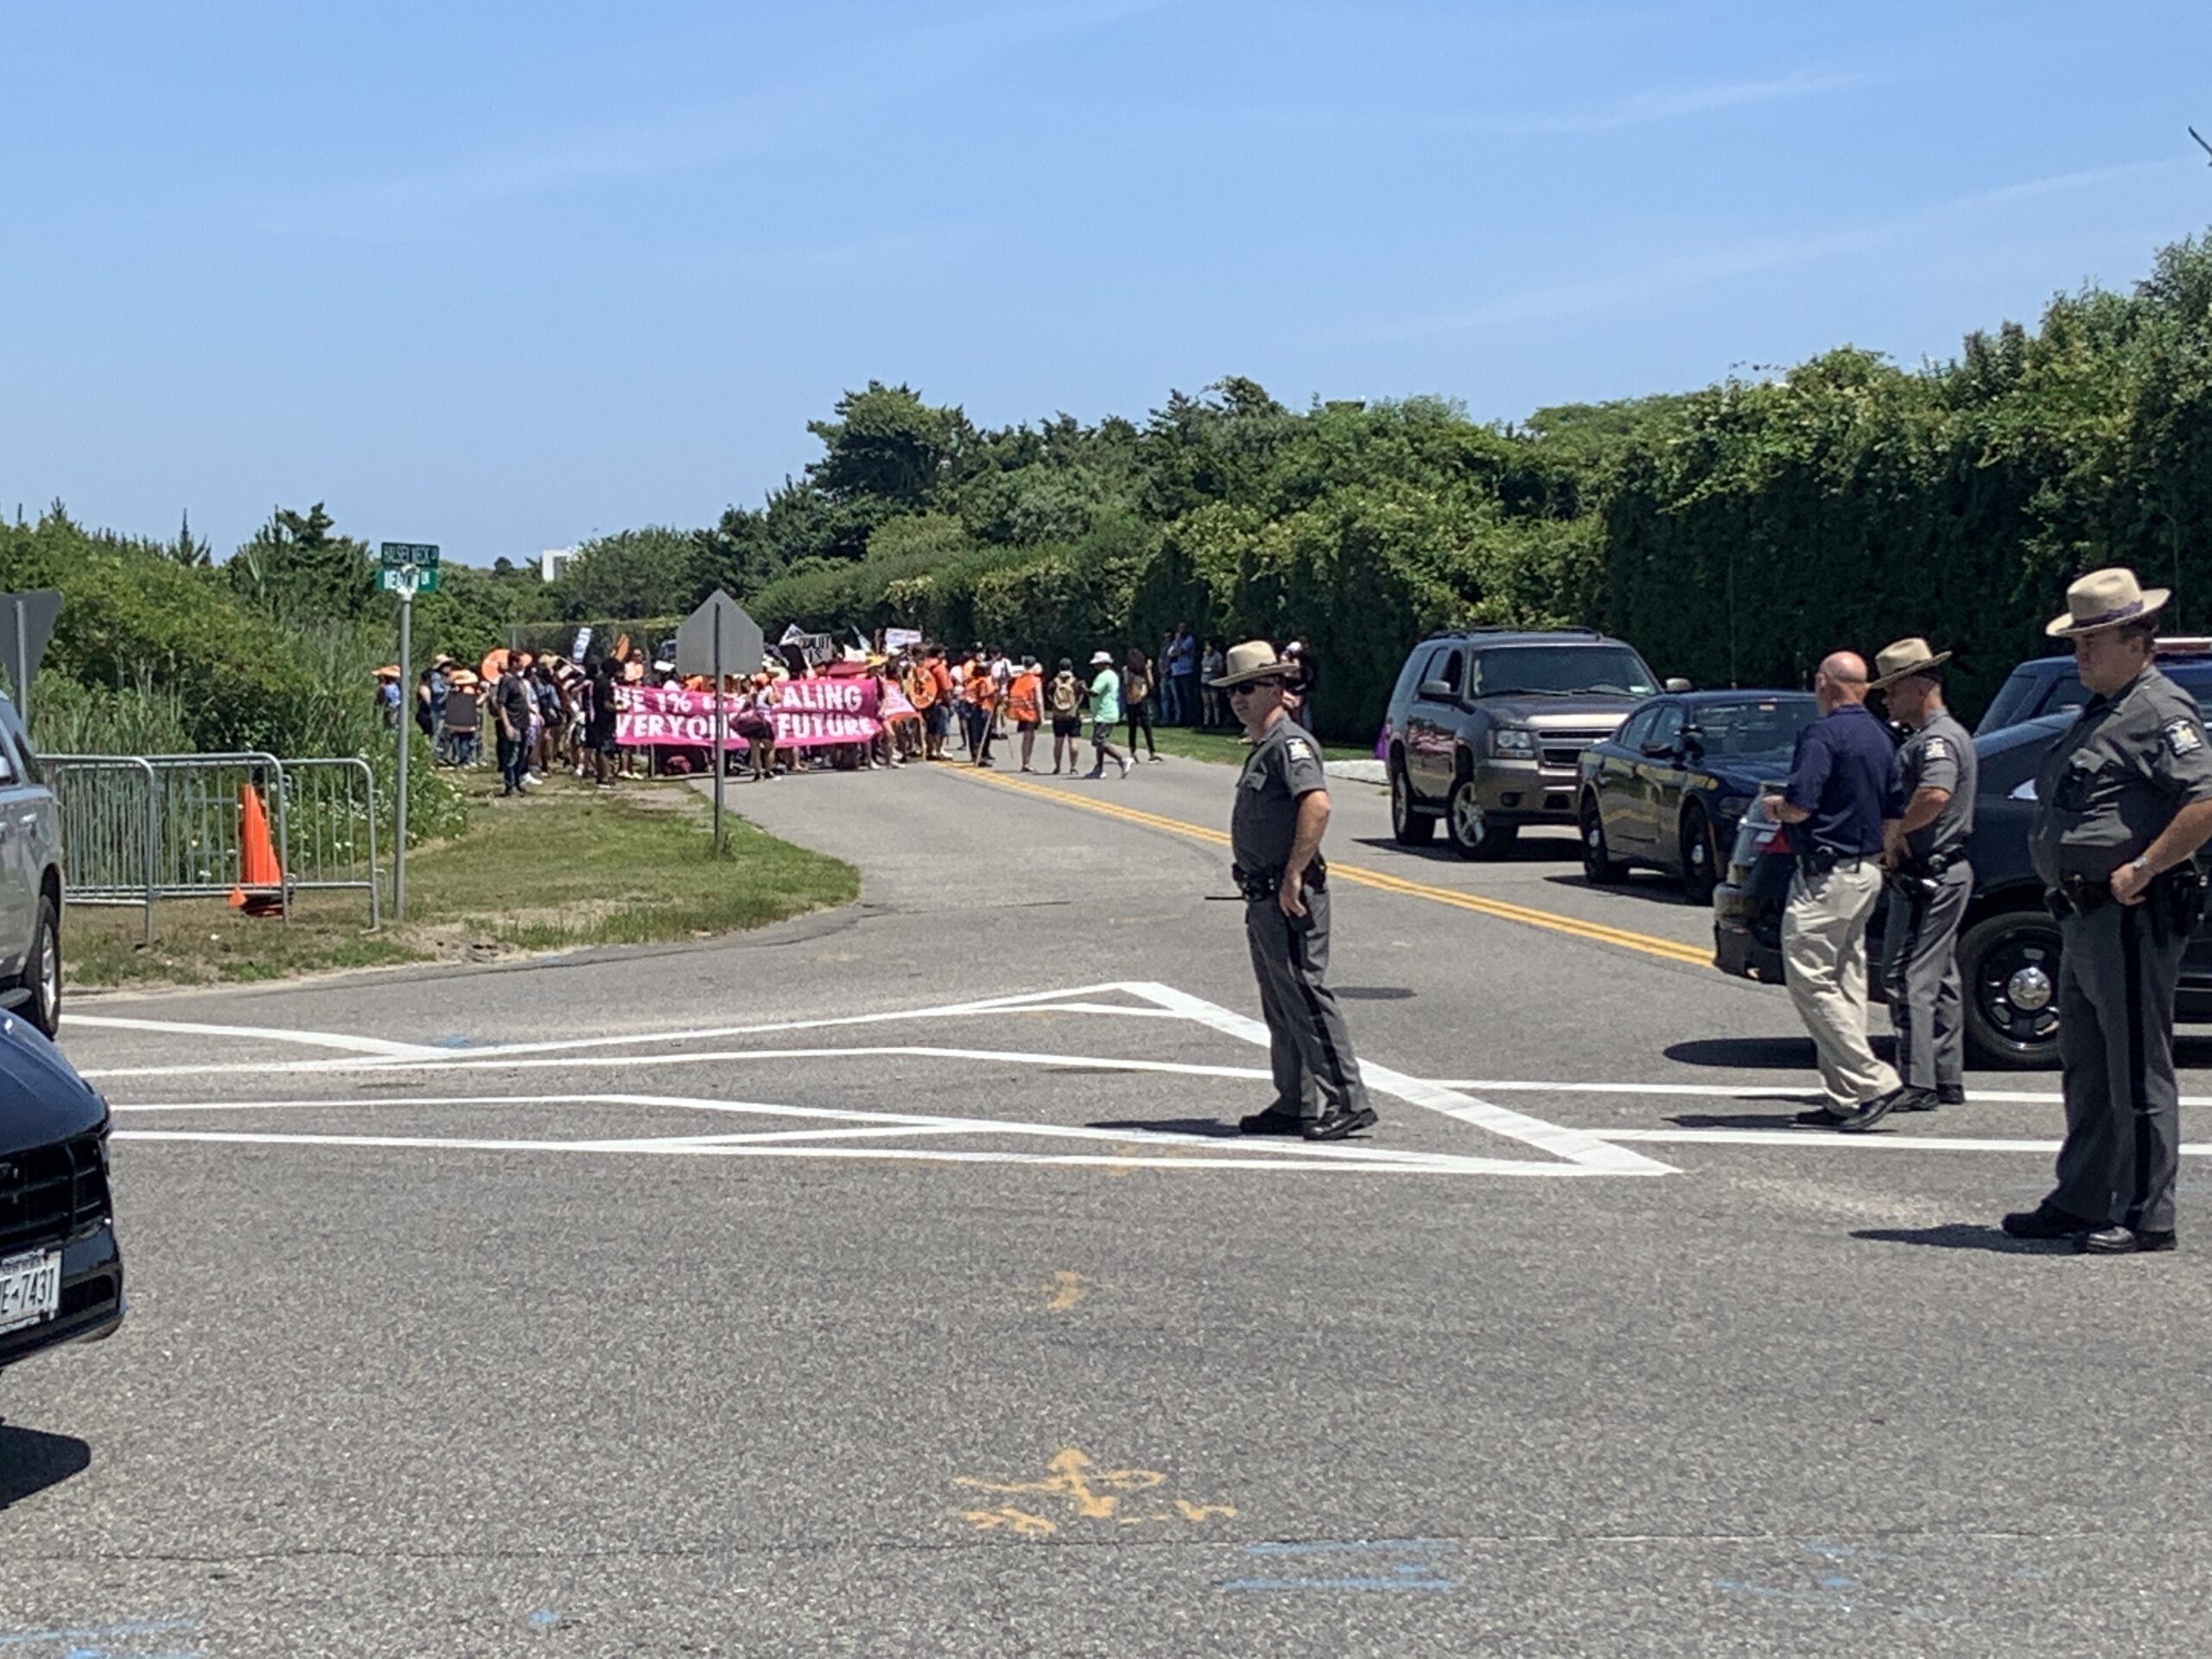 Police blocked traffic as protesters calling for higher taxes on billionaires to help cover the costs of everything from childcare to climate change mitigation, marched on Meadow Lane in Southampton Village on Saturday.  STEPHEN J. KOTZ